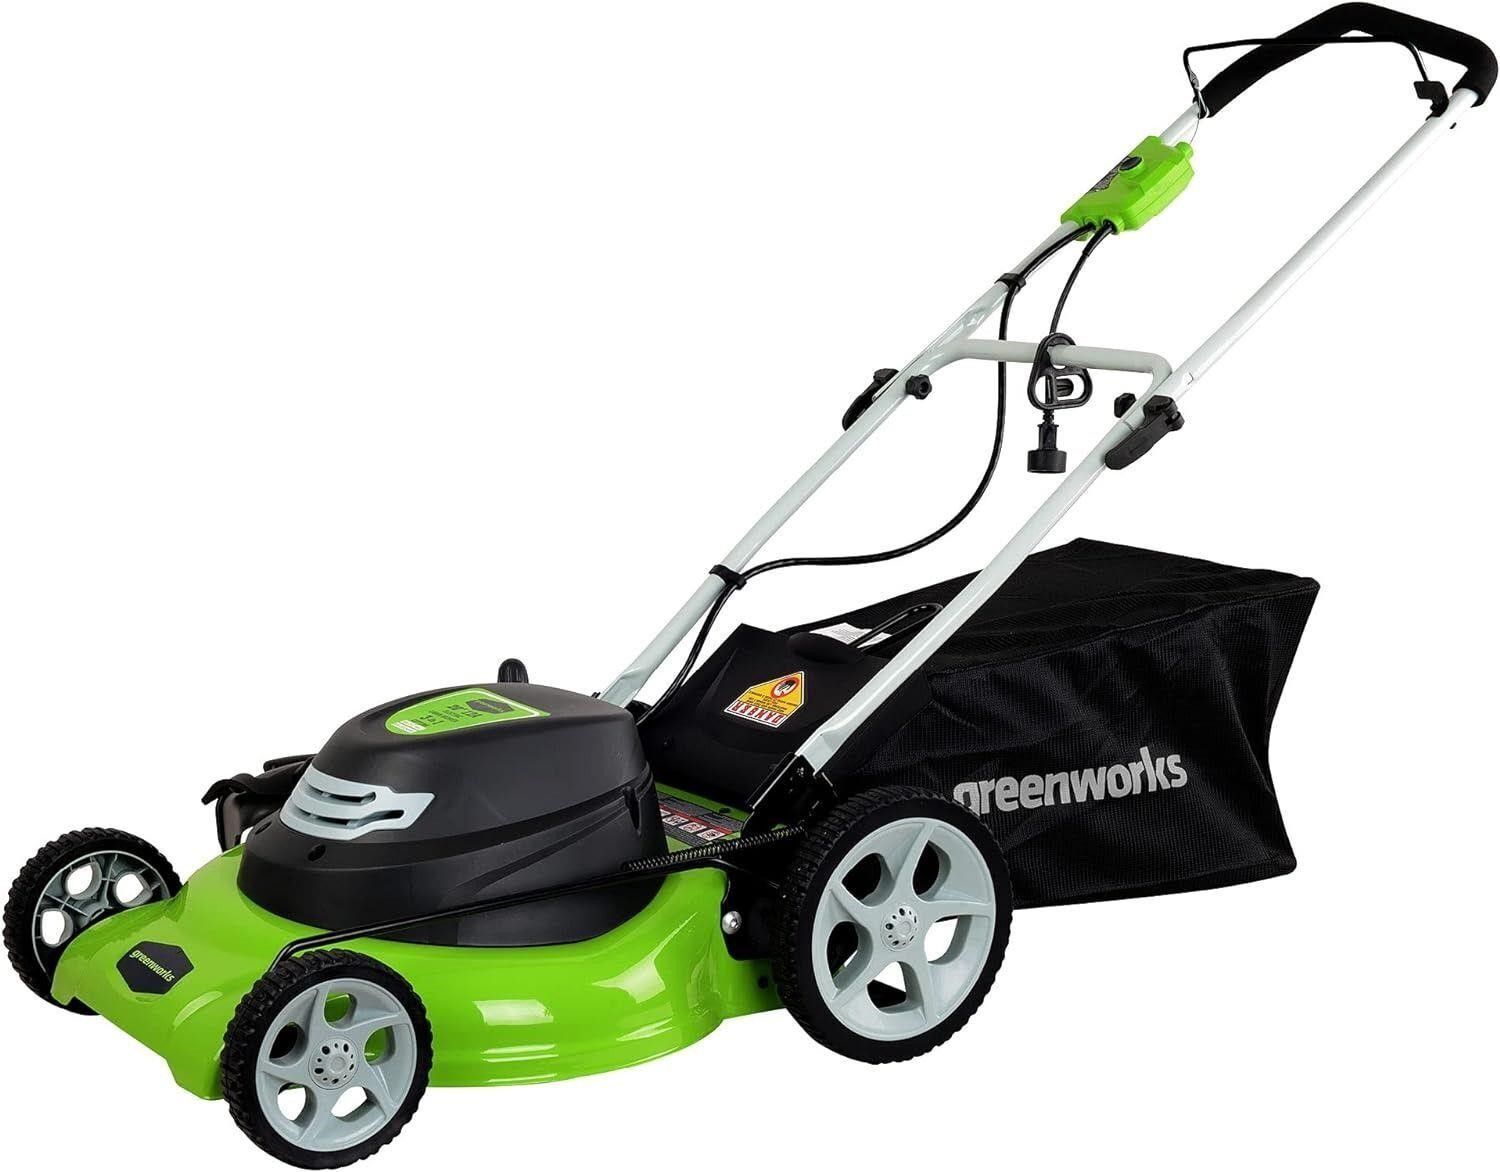 $229 Greenworks Lawn Mower-purposes for testing